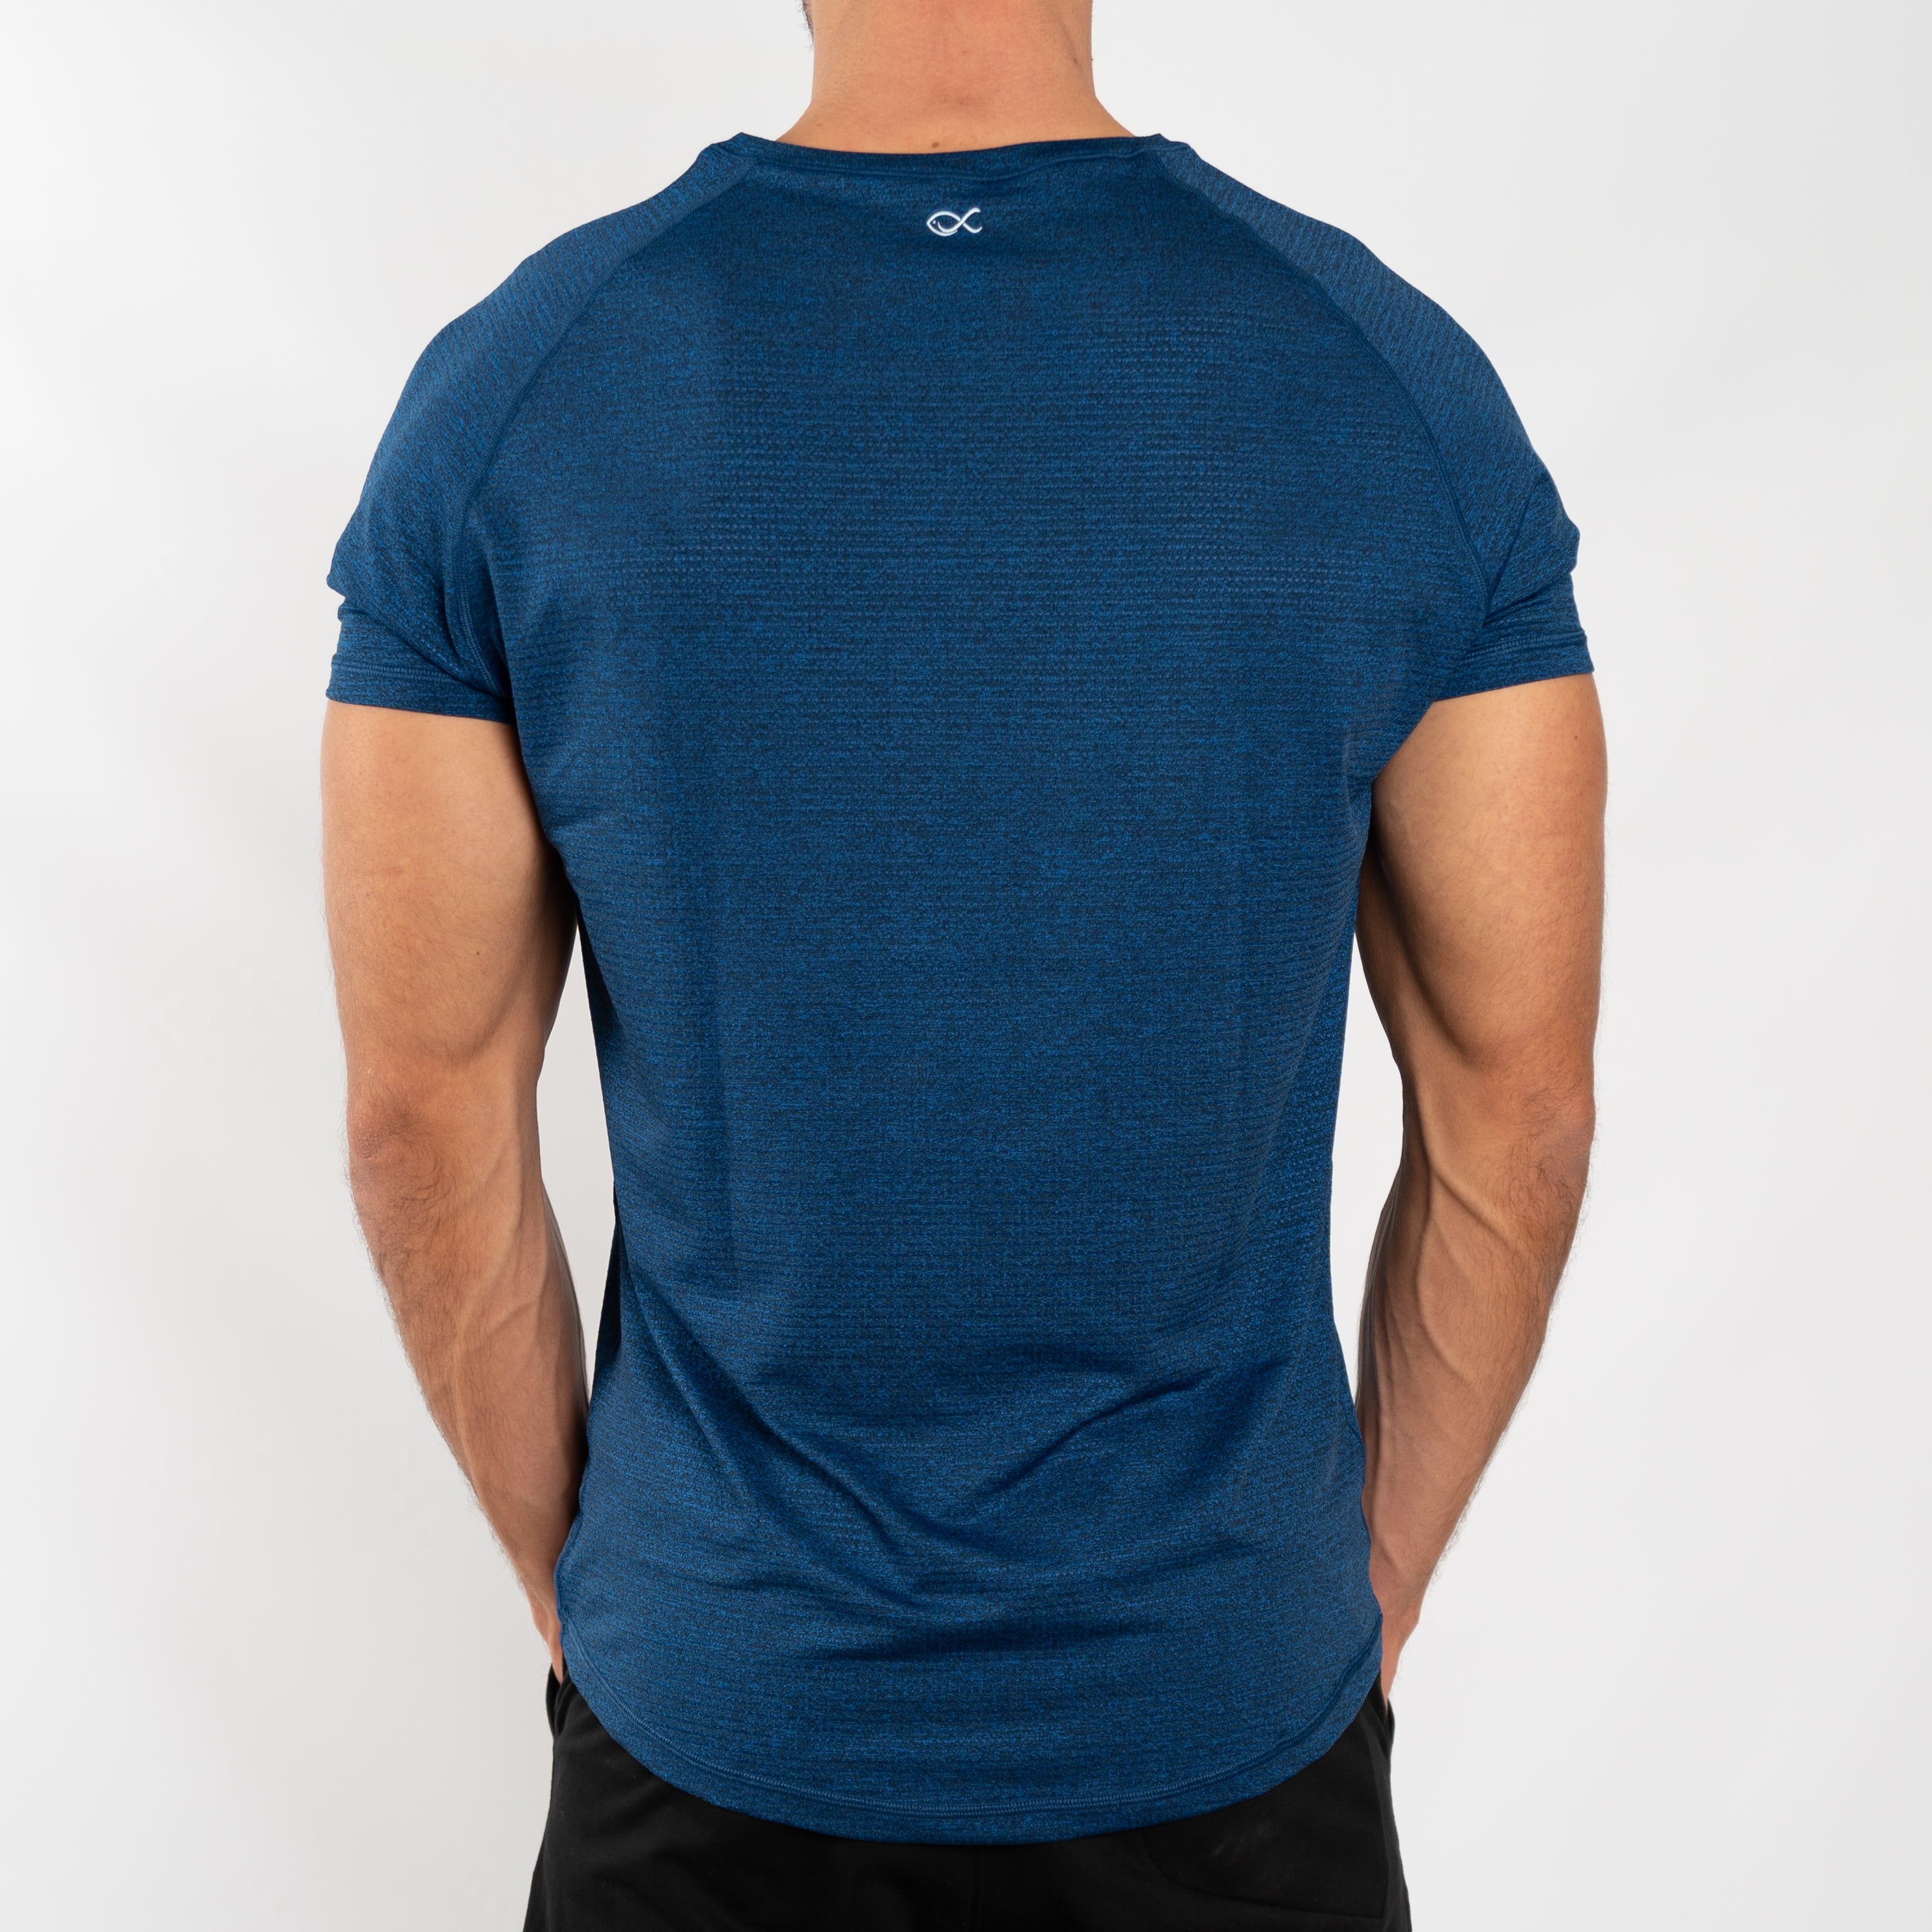 Men's Performance Tee in Blue - Southern Athletica